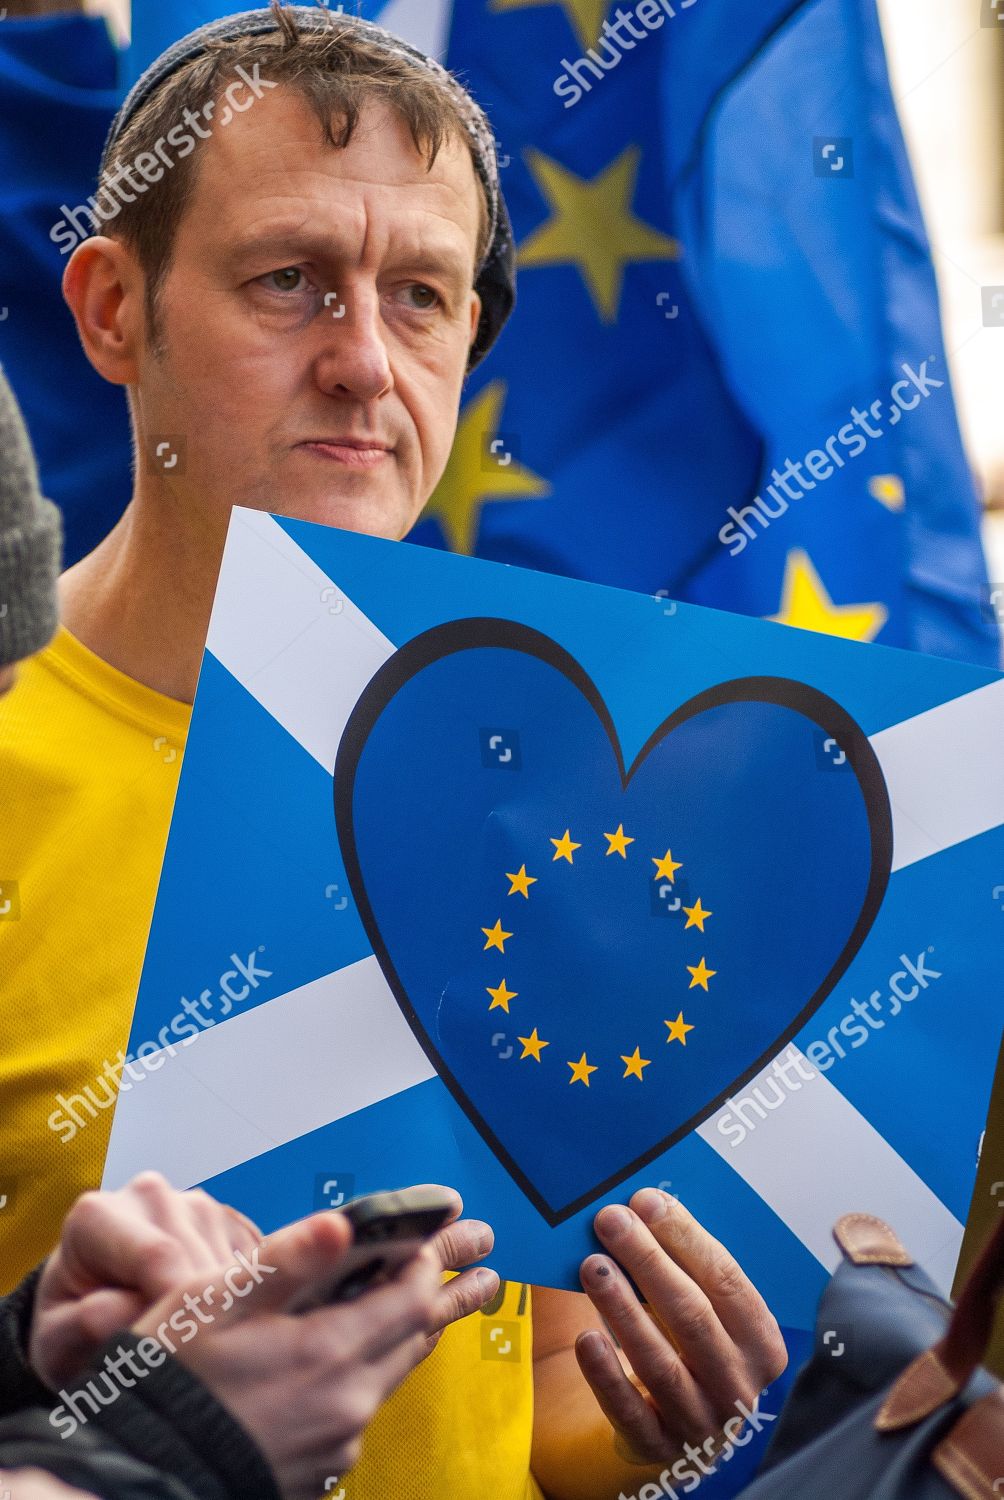 protester-hold-sign-depicting-scottish-flag-editorial-stock-photo